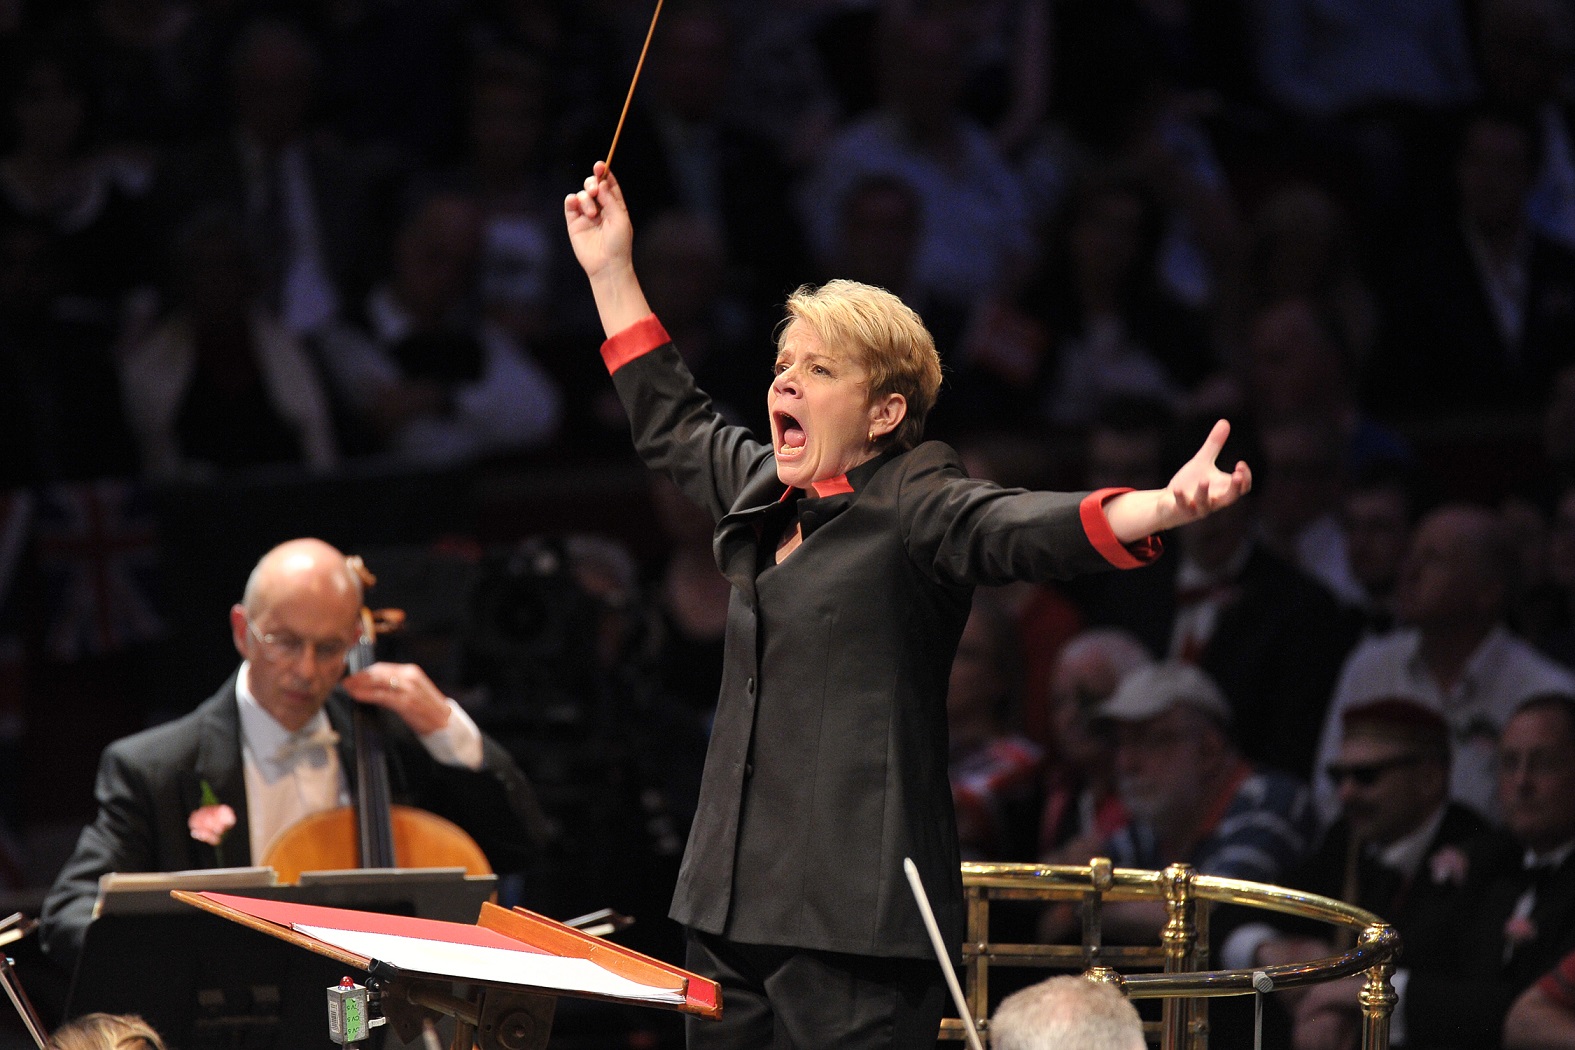 Marin Alsop at the 2015 Last Night of the Proms